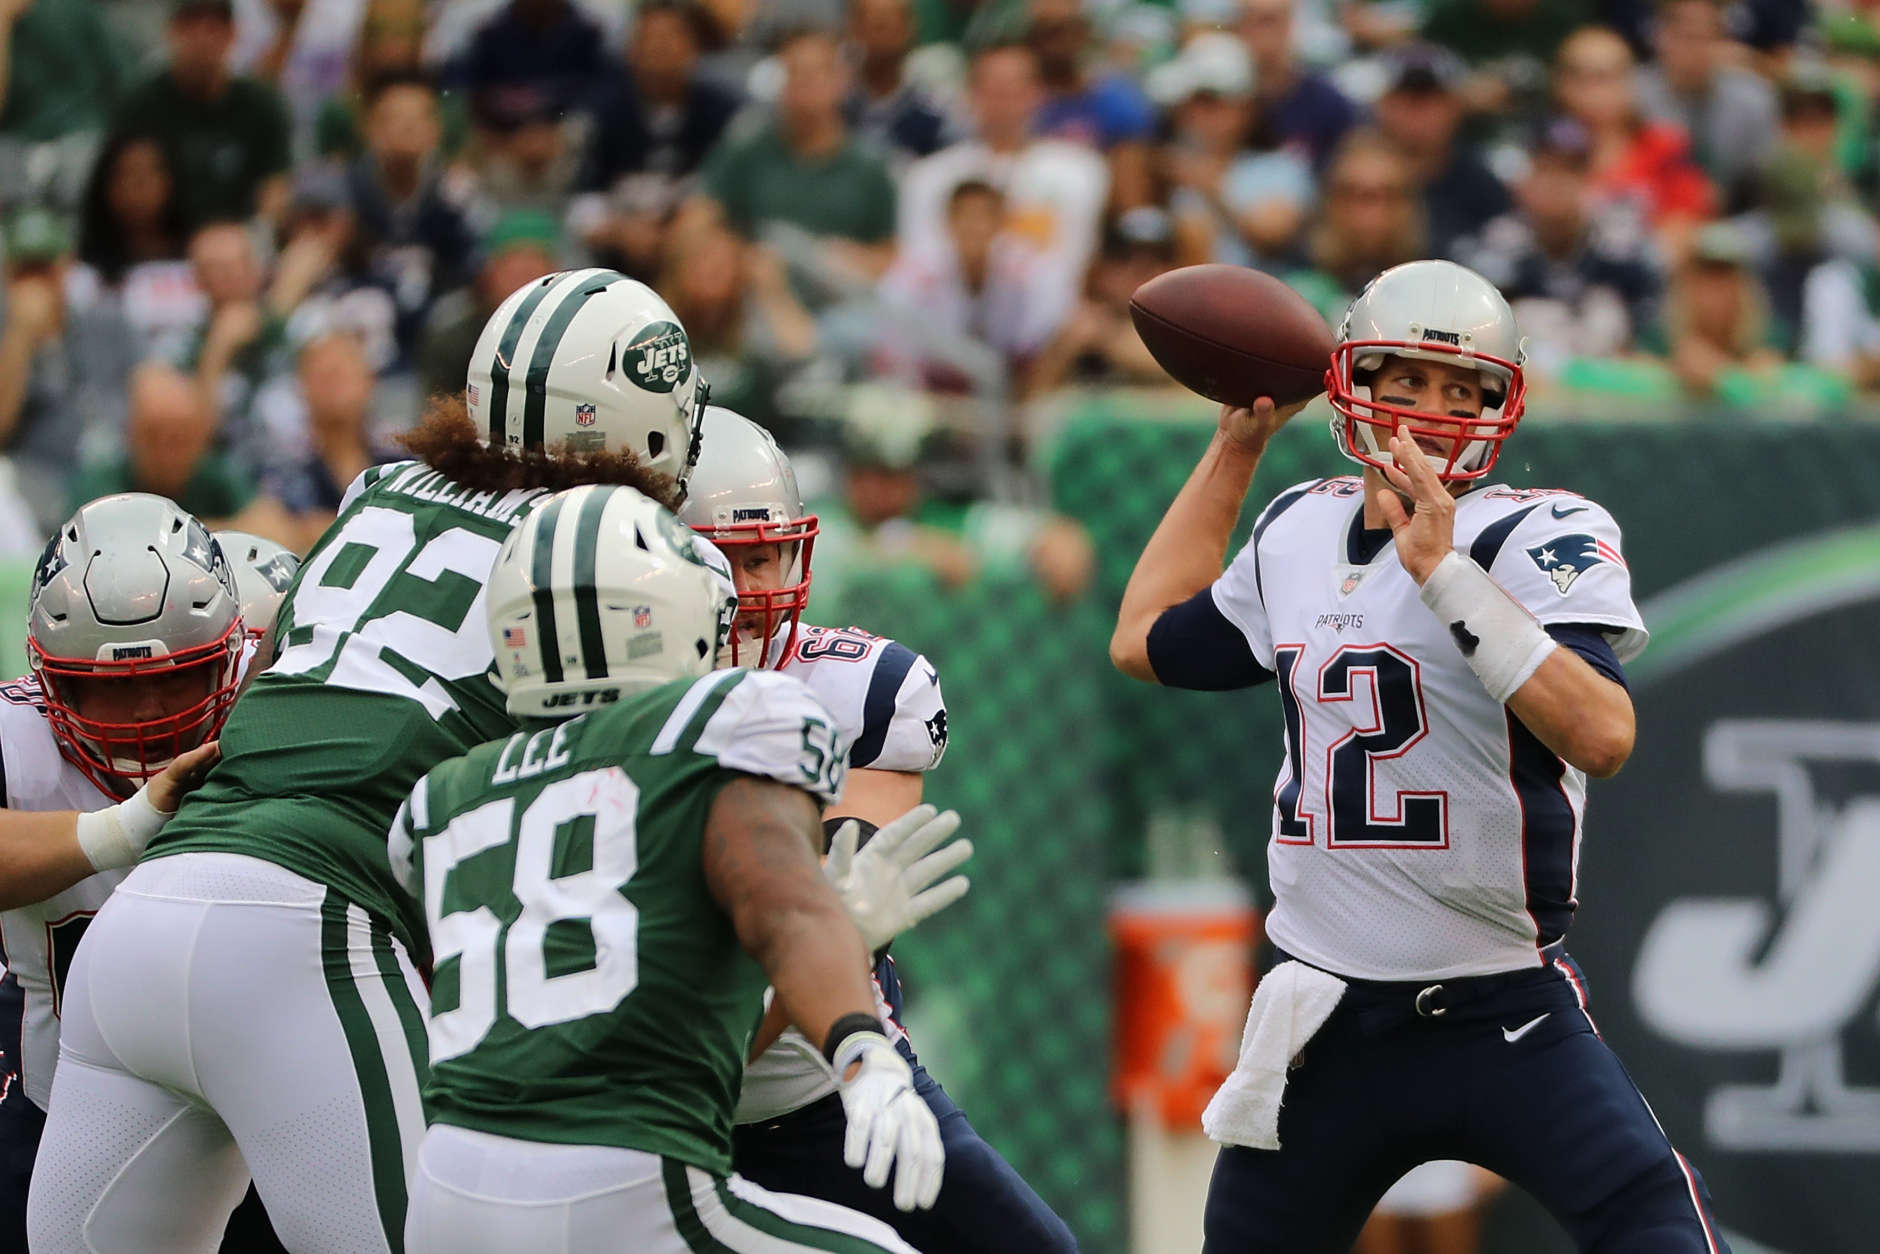 EAST RUTHERFORD, NJ - OCTOBER 15:  Quarterback Tom Brady #12 of the New England Patriots looks to pass against the New York Jets during the second quarter of their game at MetLife Stadium on October 15, 2017 in East Rutherford, New Jersey. The New England Patriots won 24-17. (Photo by Abbie Parr/Getty Images)